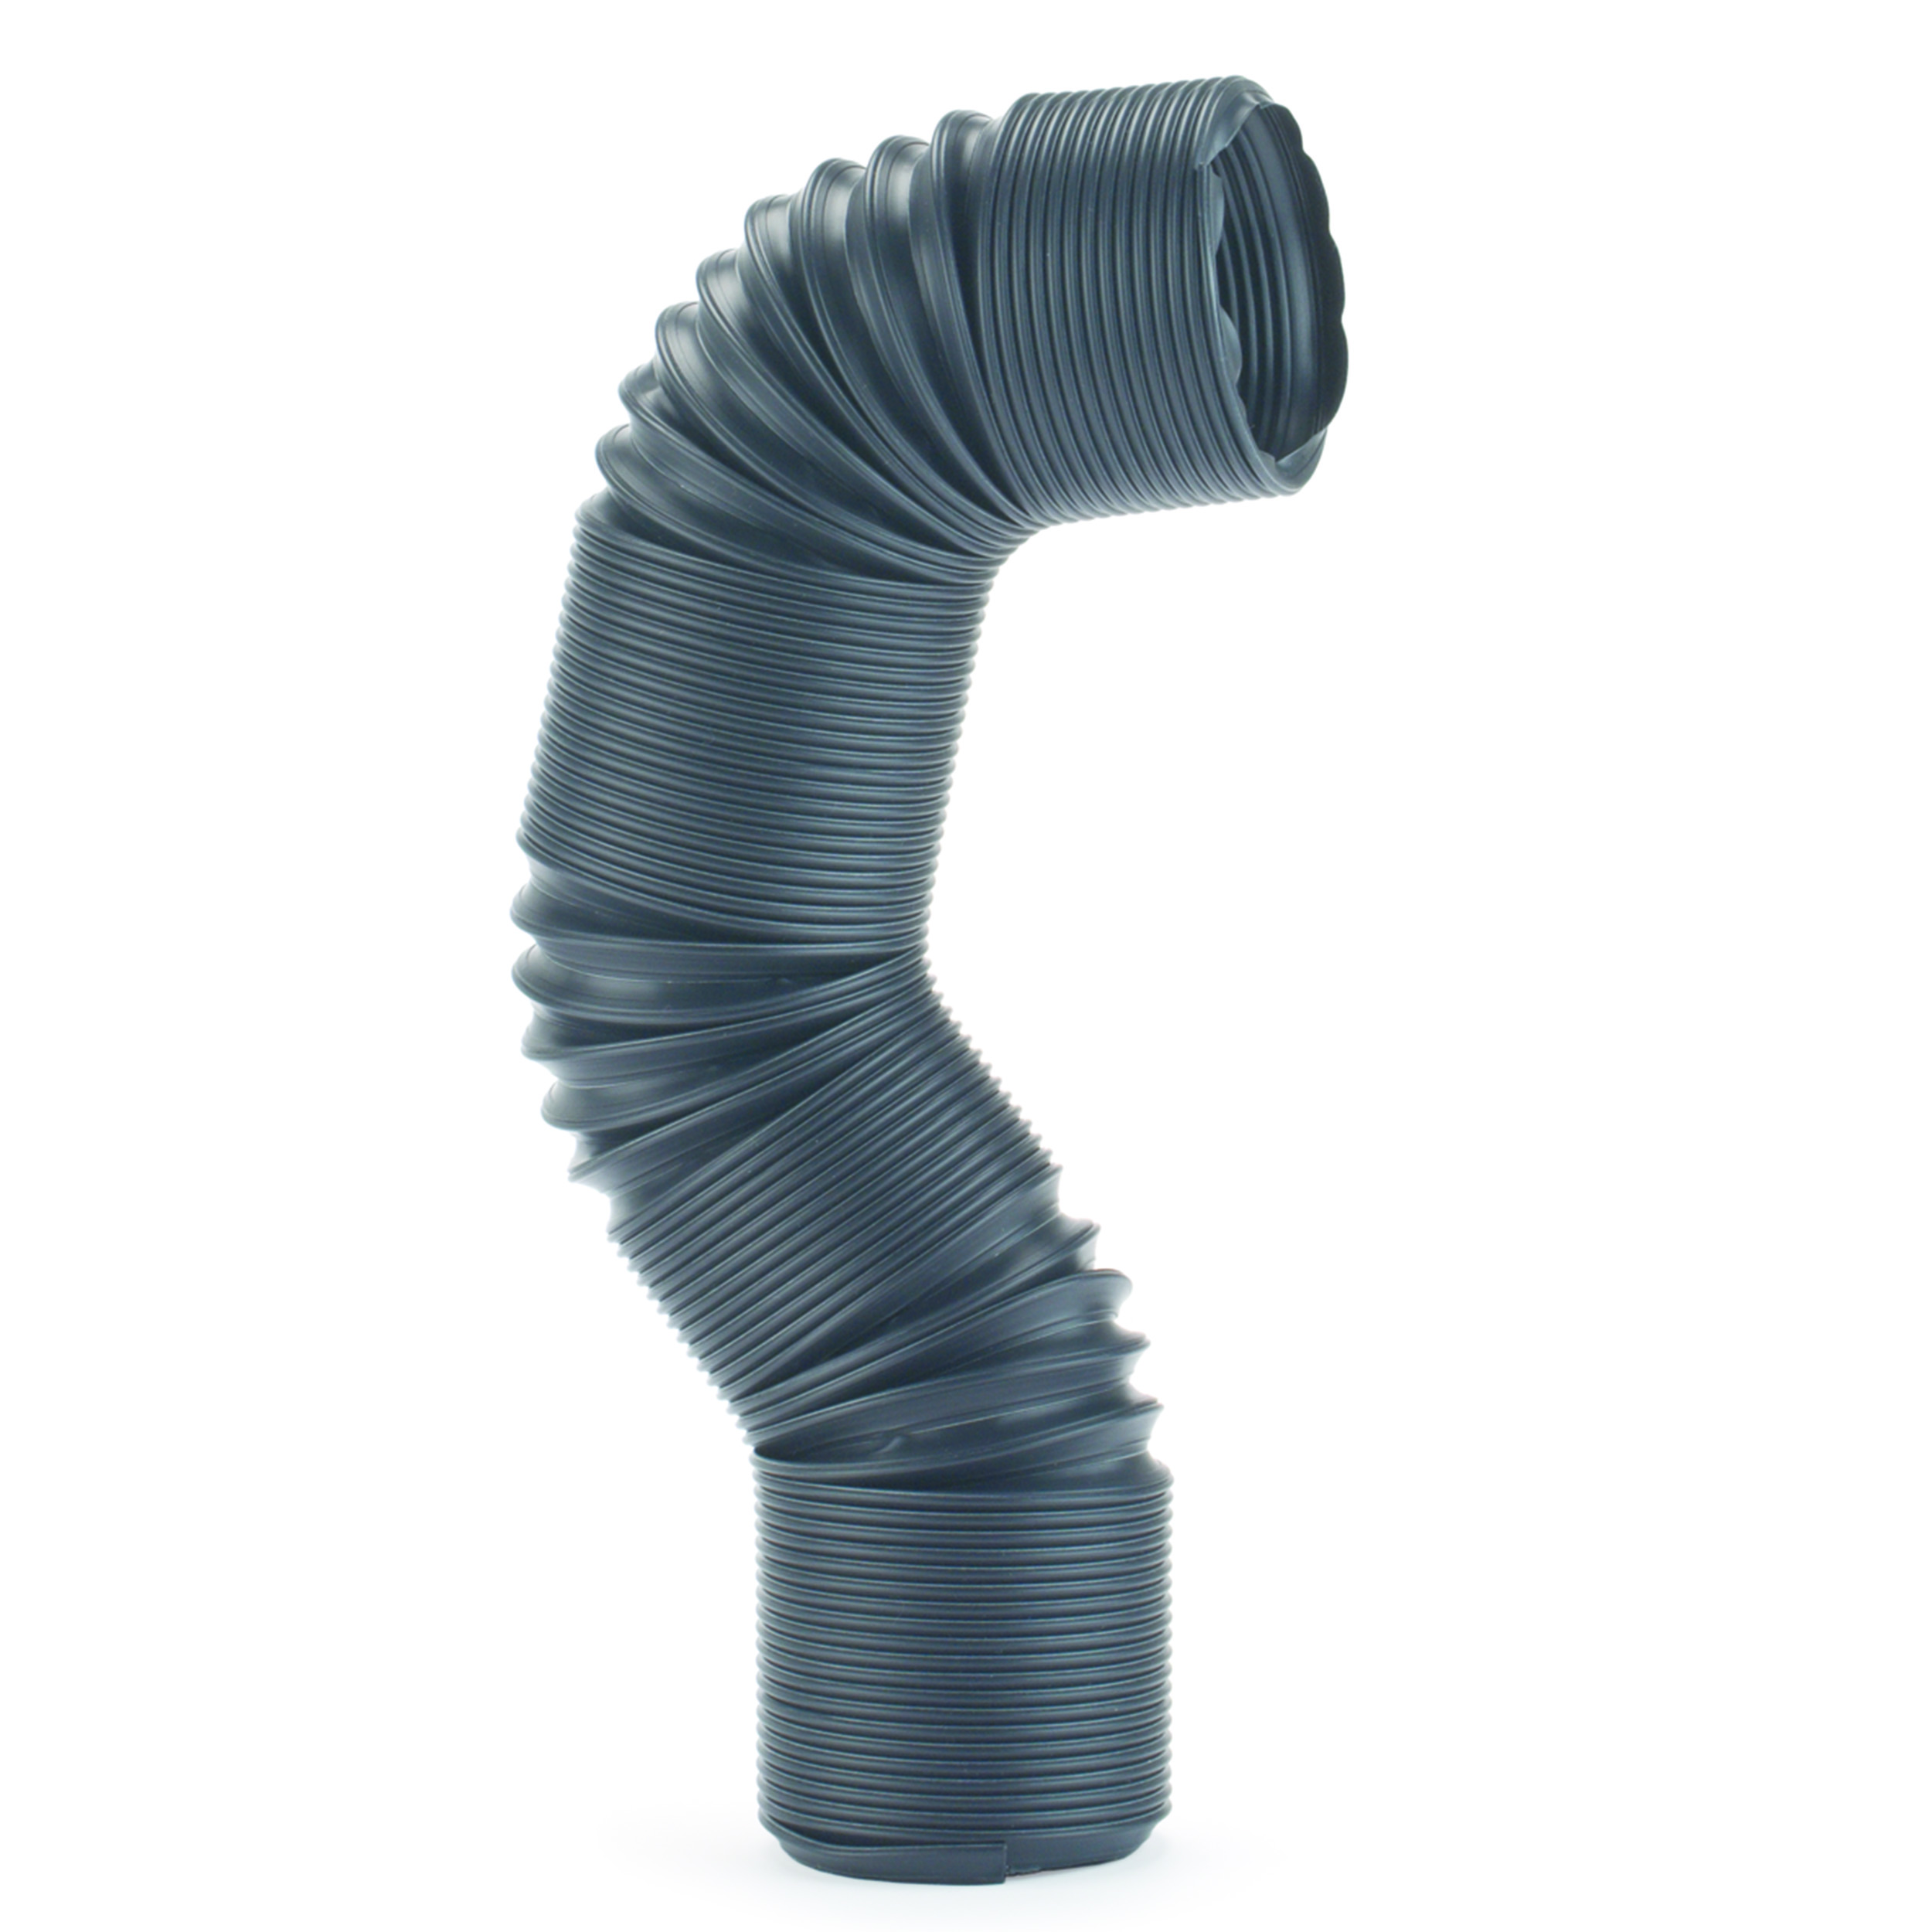 Dust Collection Hose, Stay-put, 2-1/2" Od X 36"